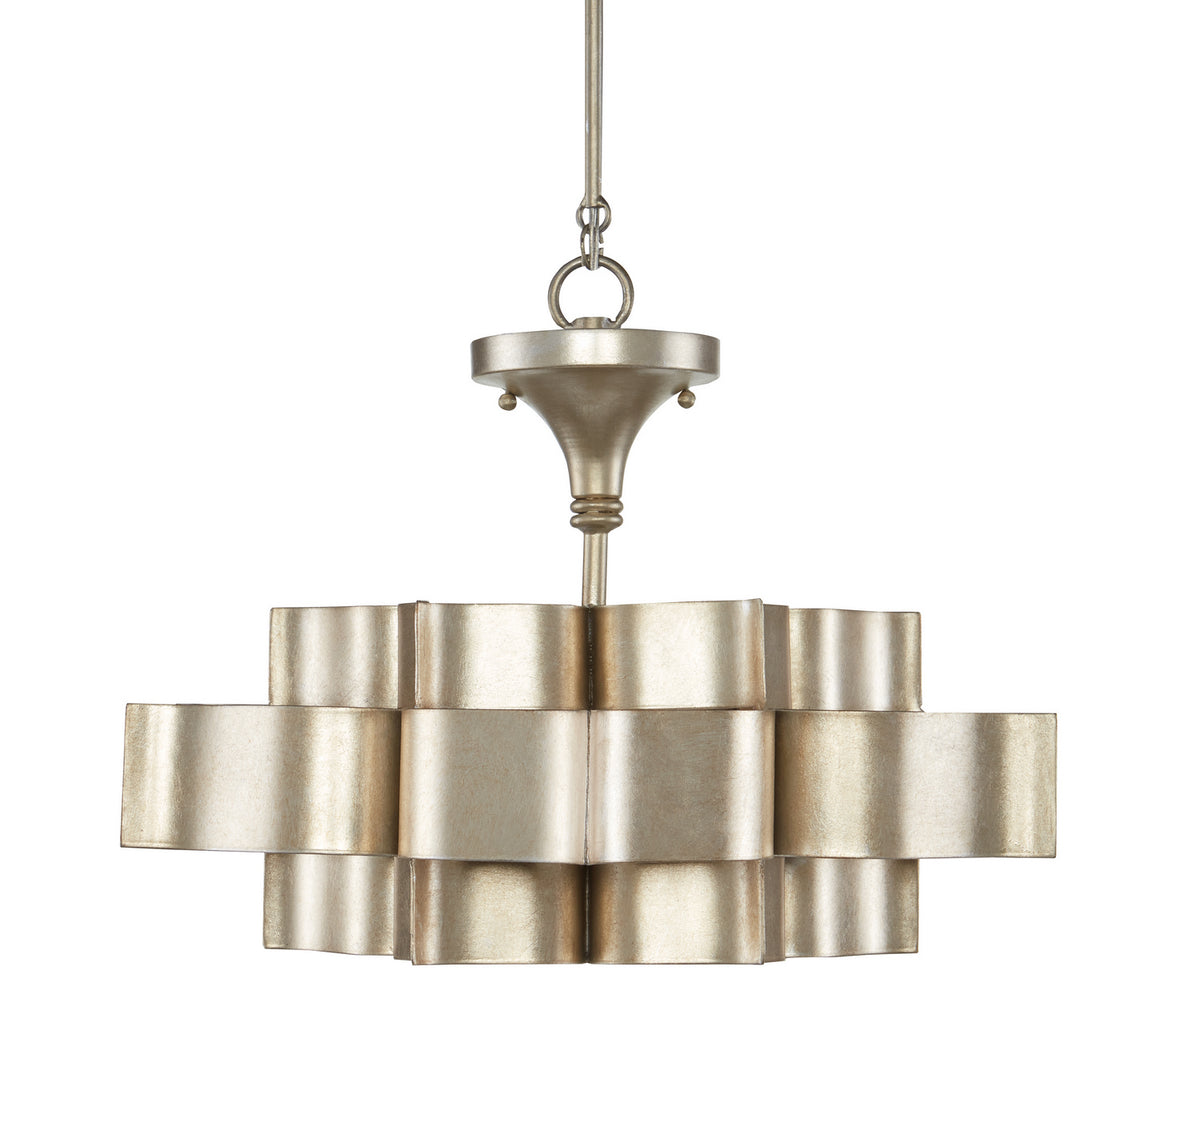 Currey and Company One Light Chandelier from the Grand collection in Contemporary Silver Leaf finish